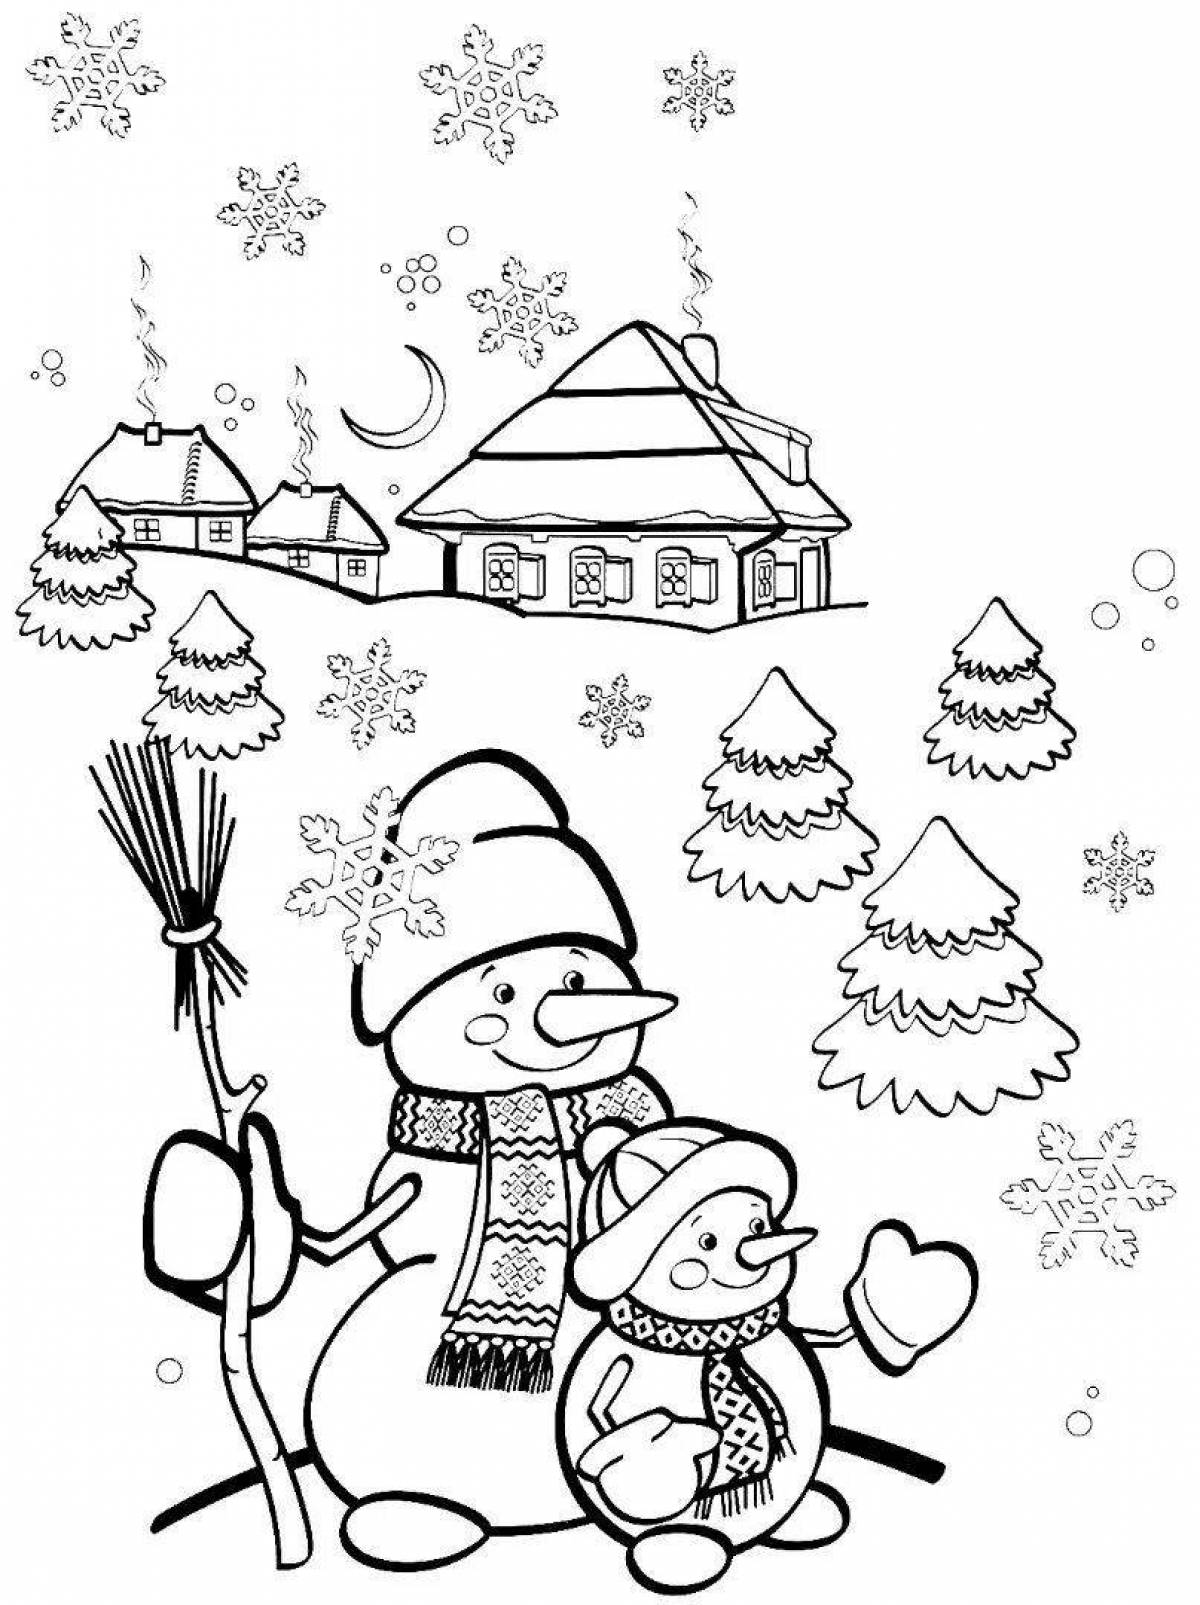 Sparkly children's Christmas coloring book